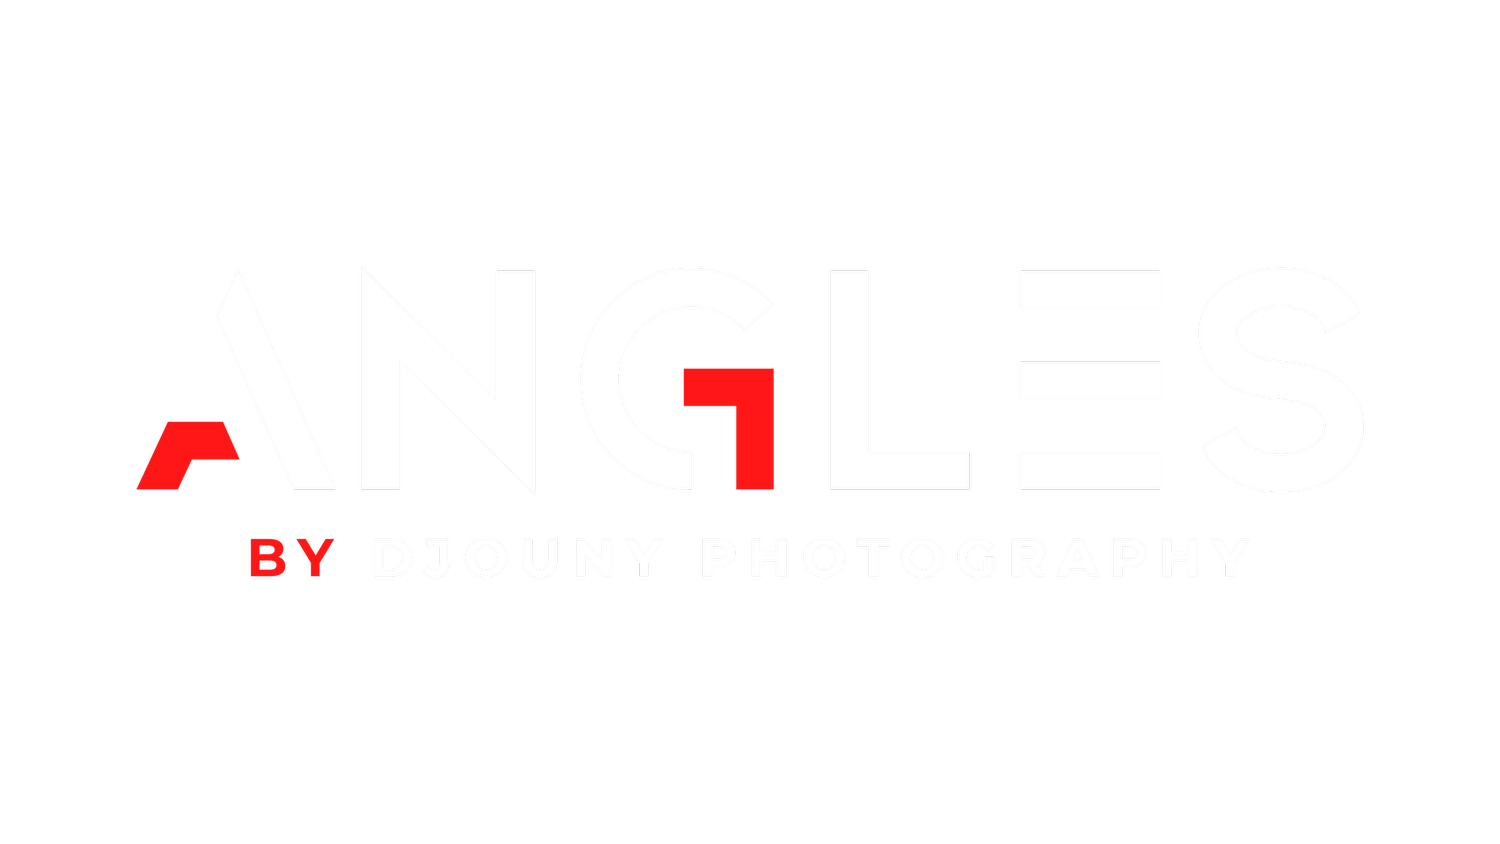 ANGLES BY DJOUNY PHOTOGRAPHY